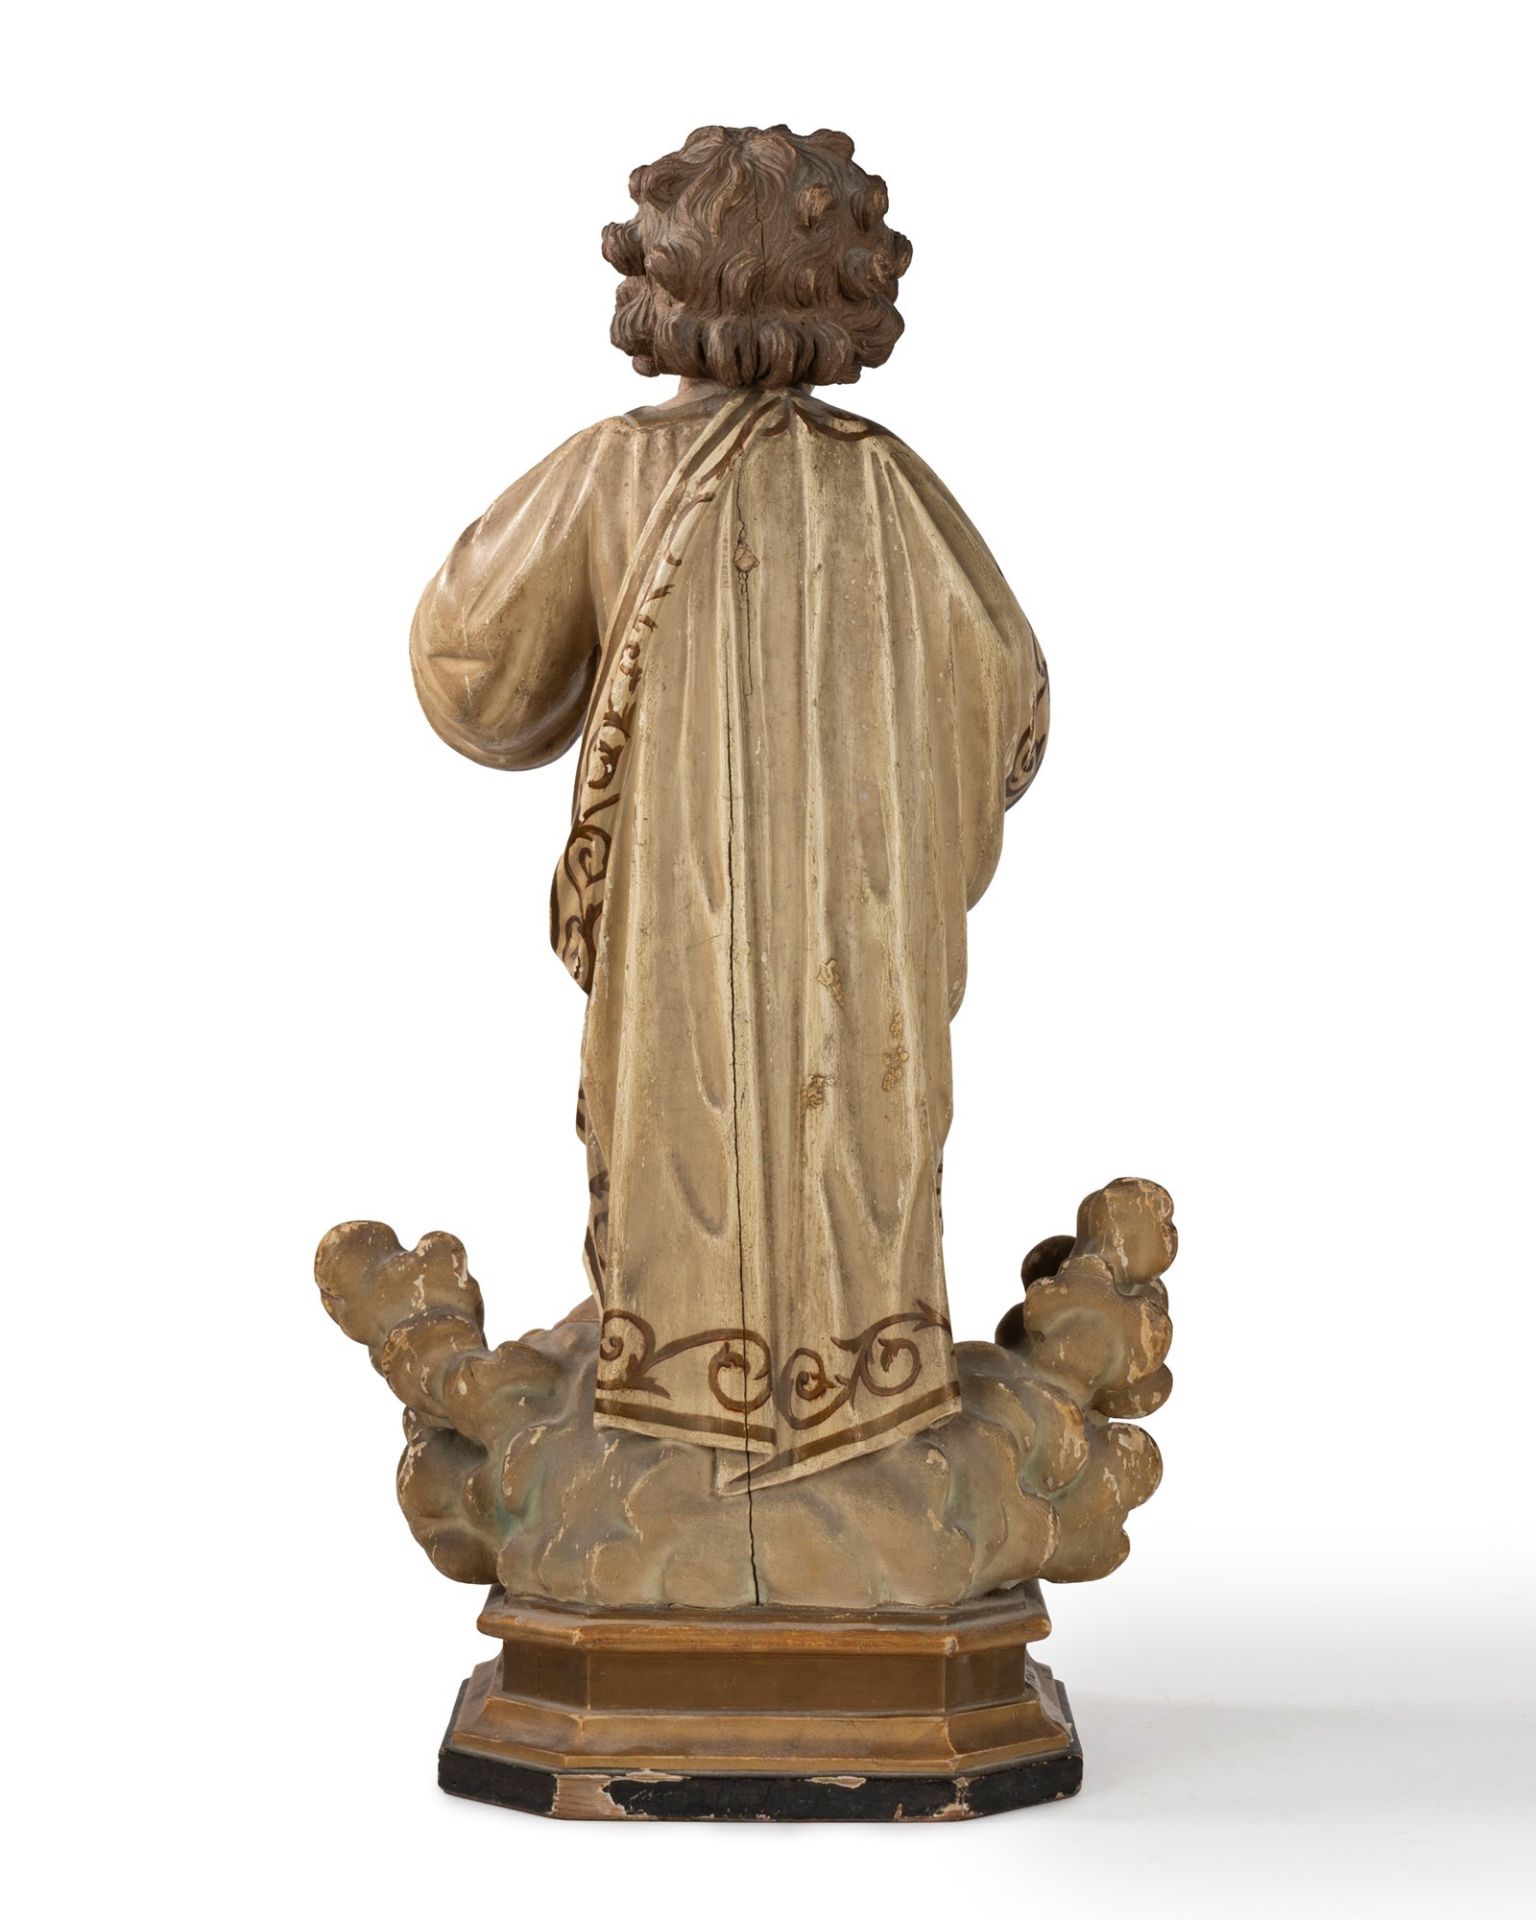 Baby Jesus in carved and lacquered wood, 19th century - Image 2 of 8